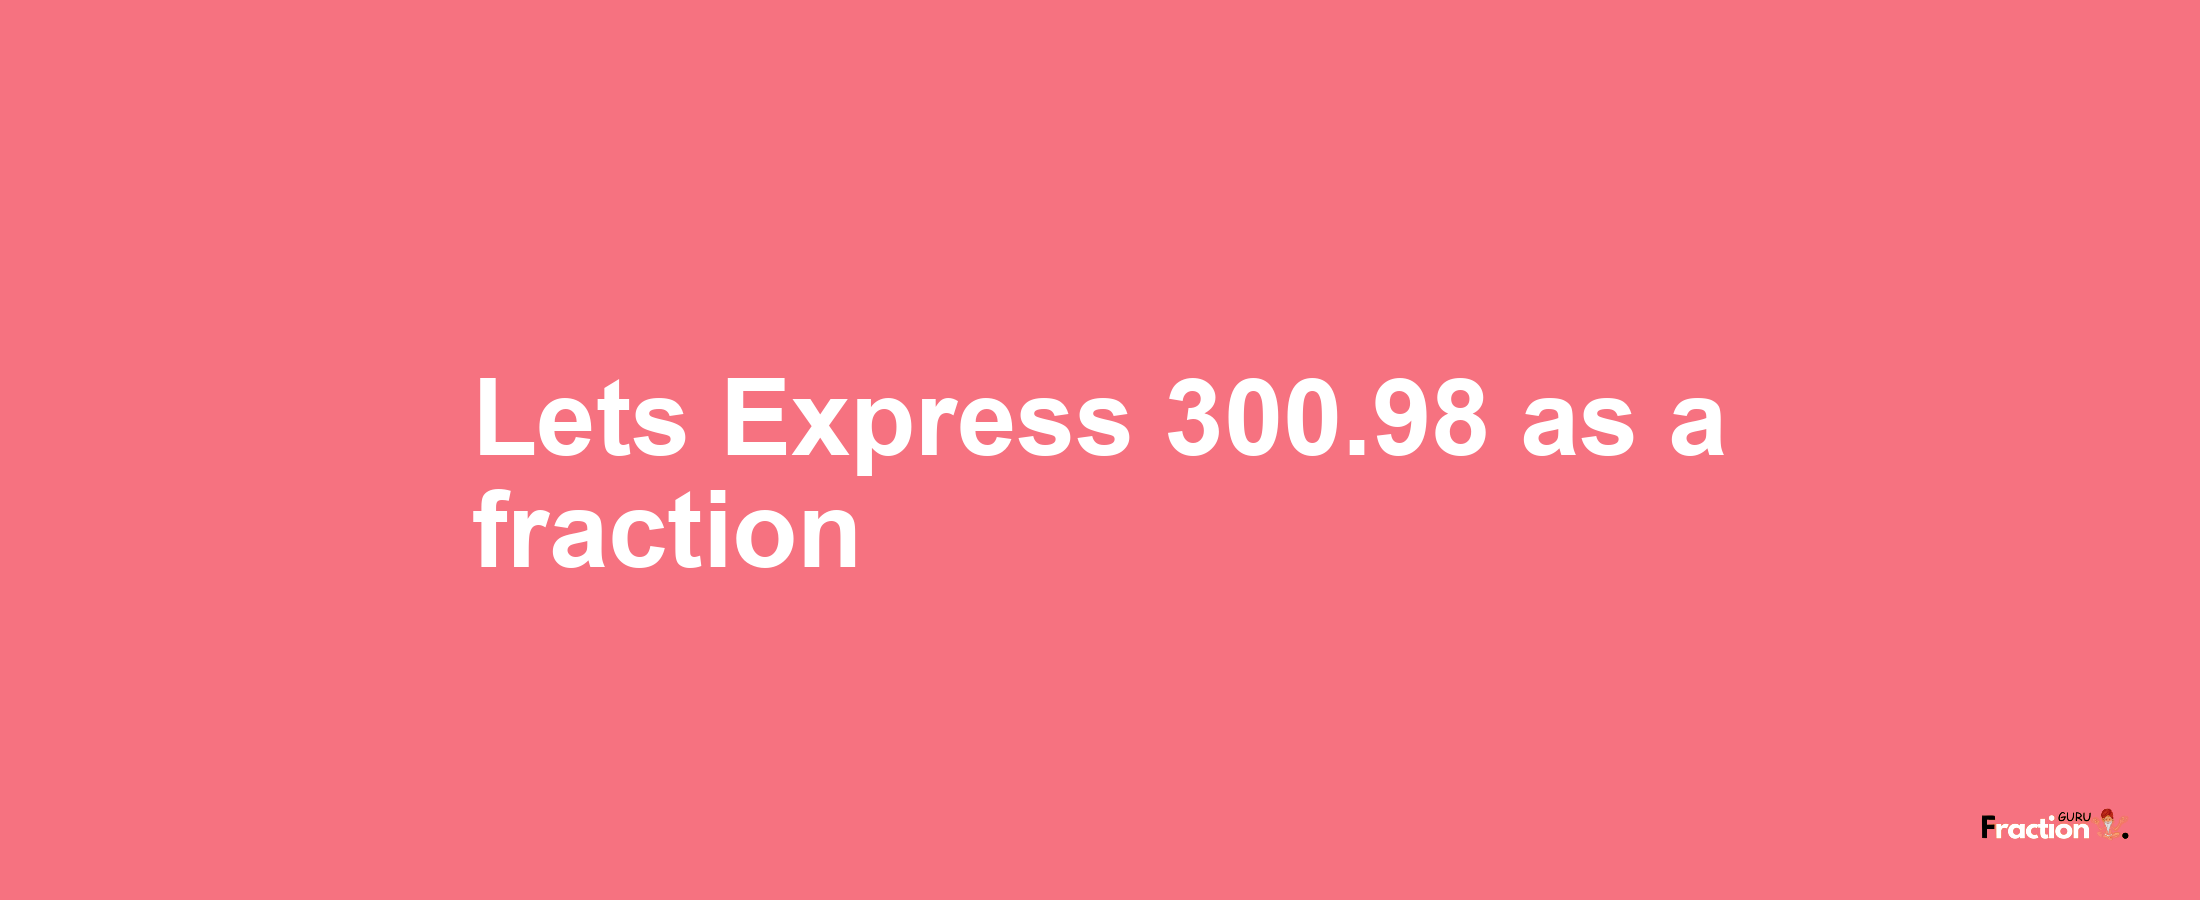 Lets Express 300.98 as afraction